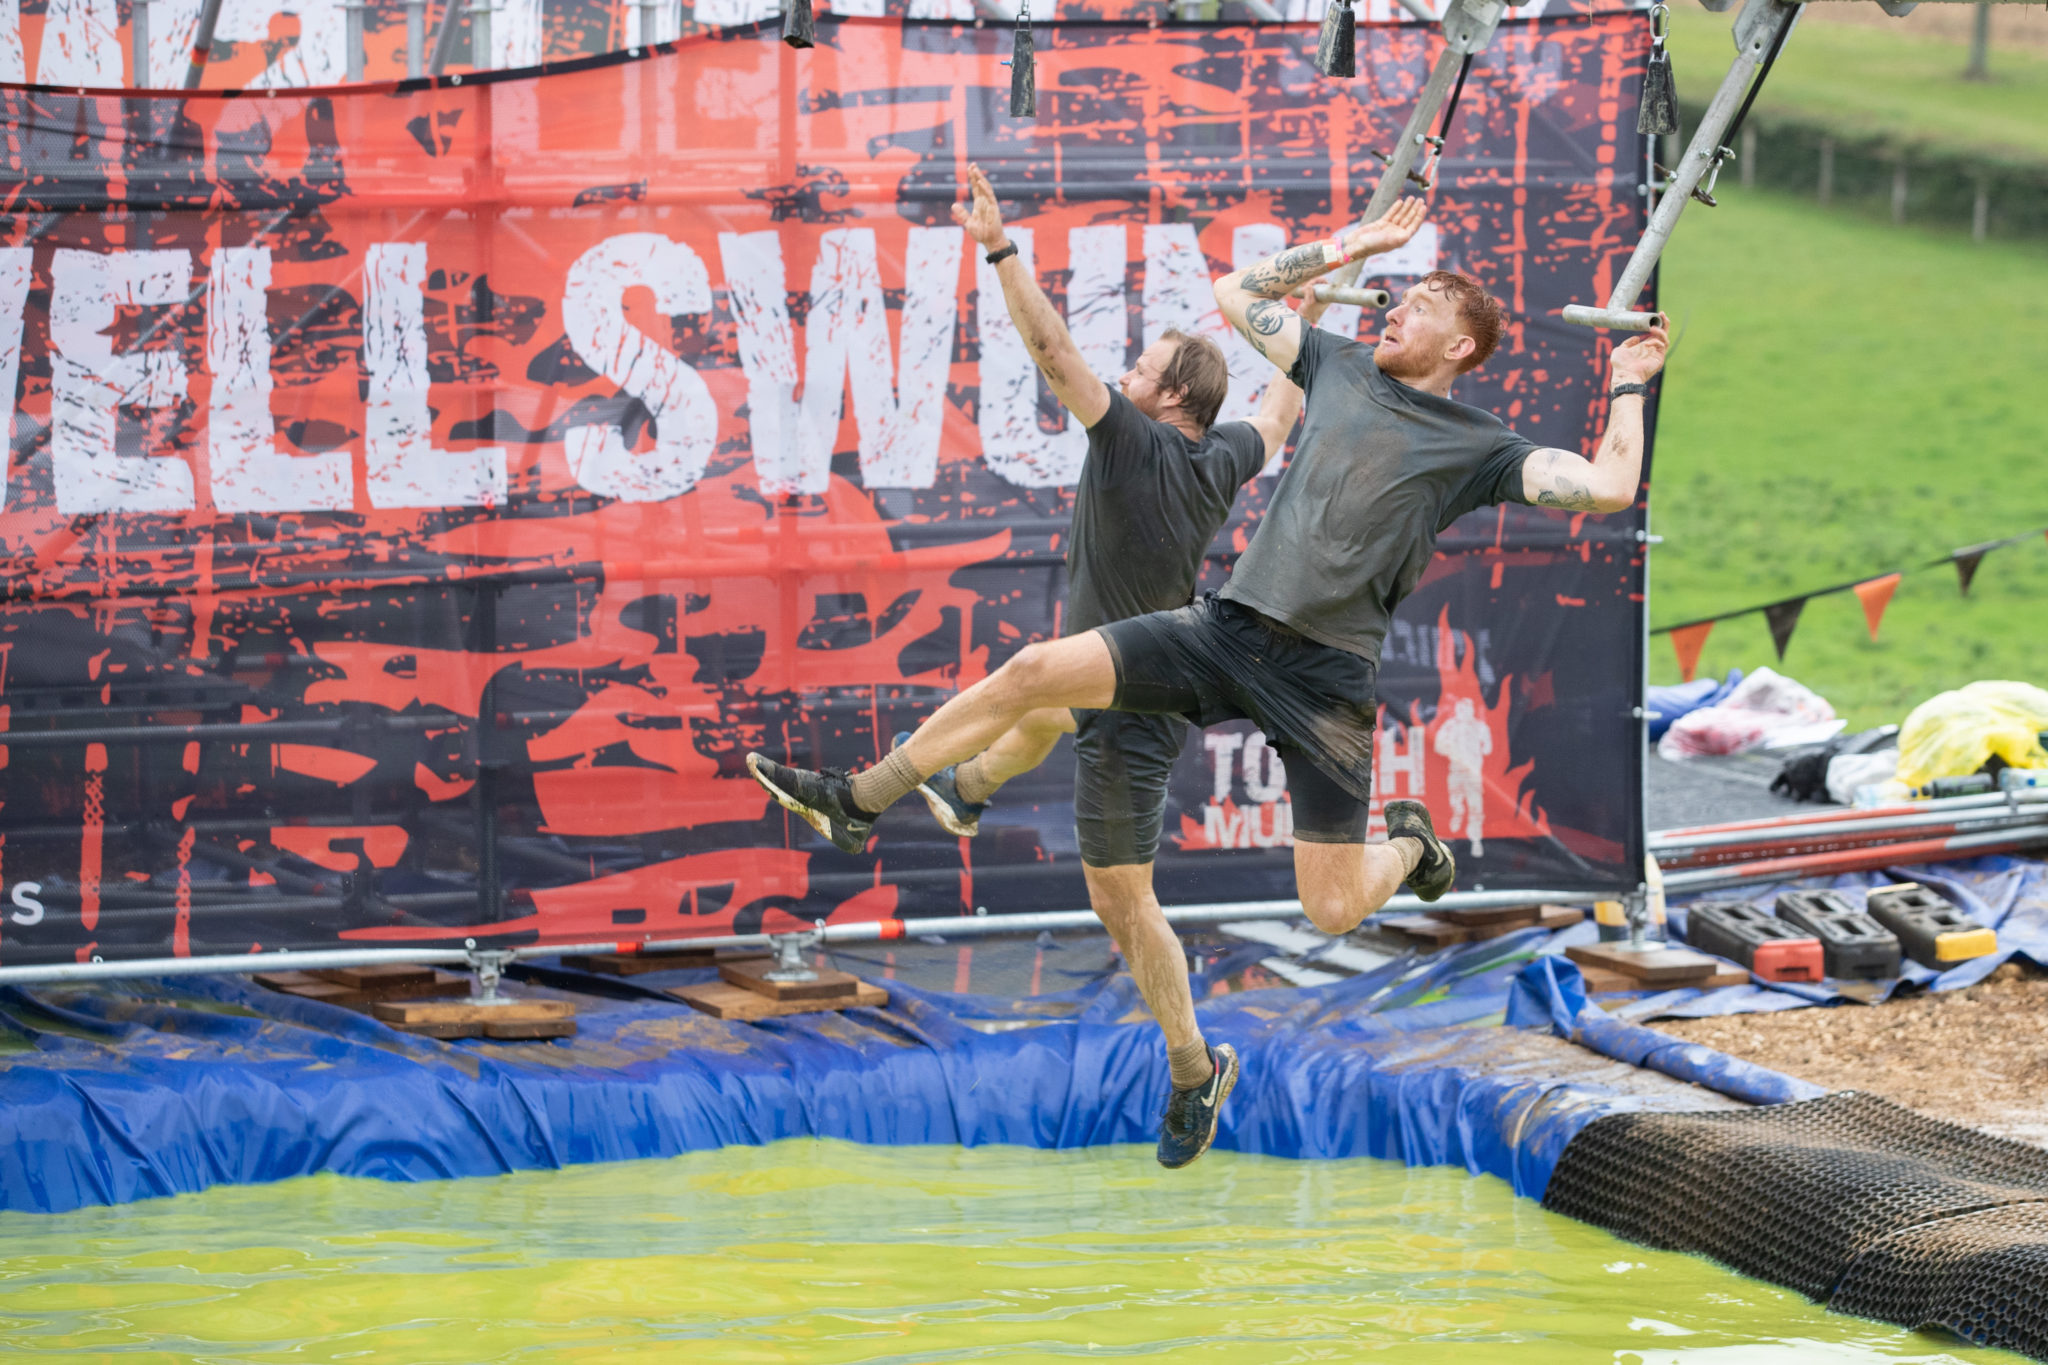 Mud Run Obstacles South West Tough Mudder UK